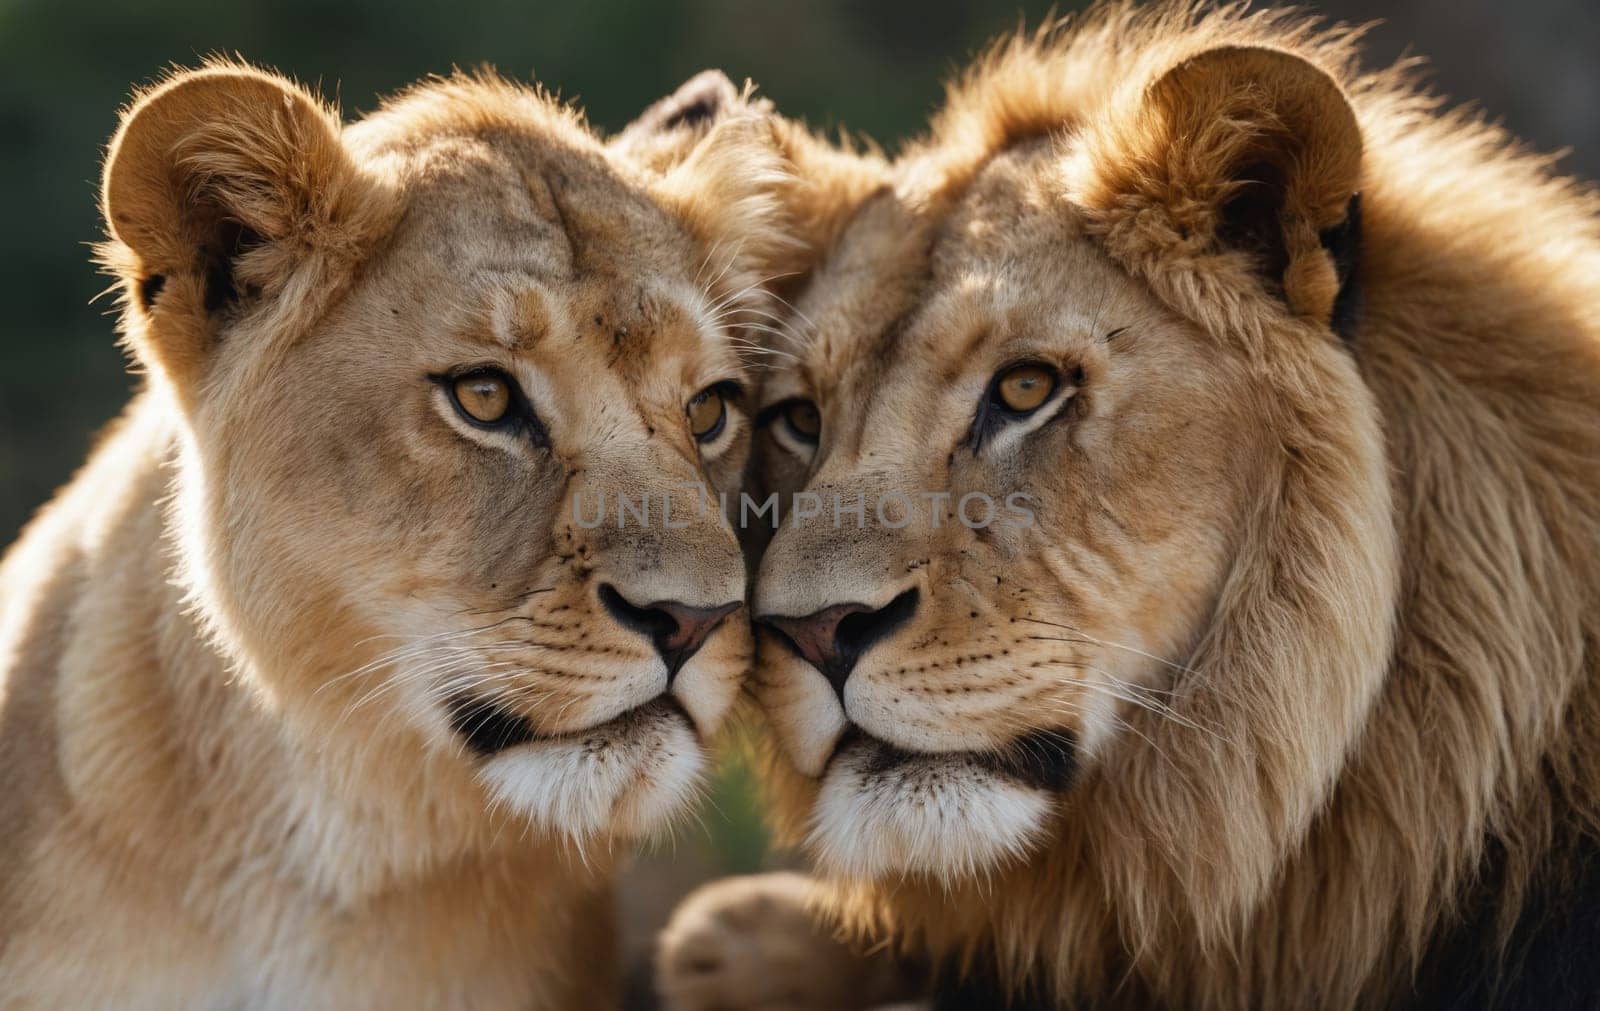 Two big cats with whiskers standing next to each other, gazing intently by Andre1ns